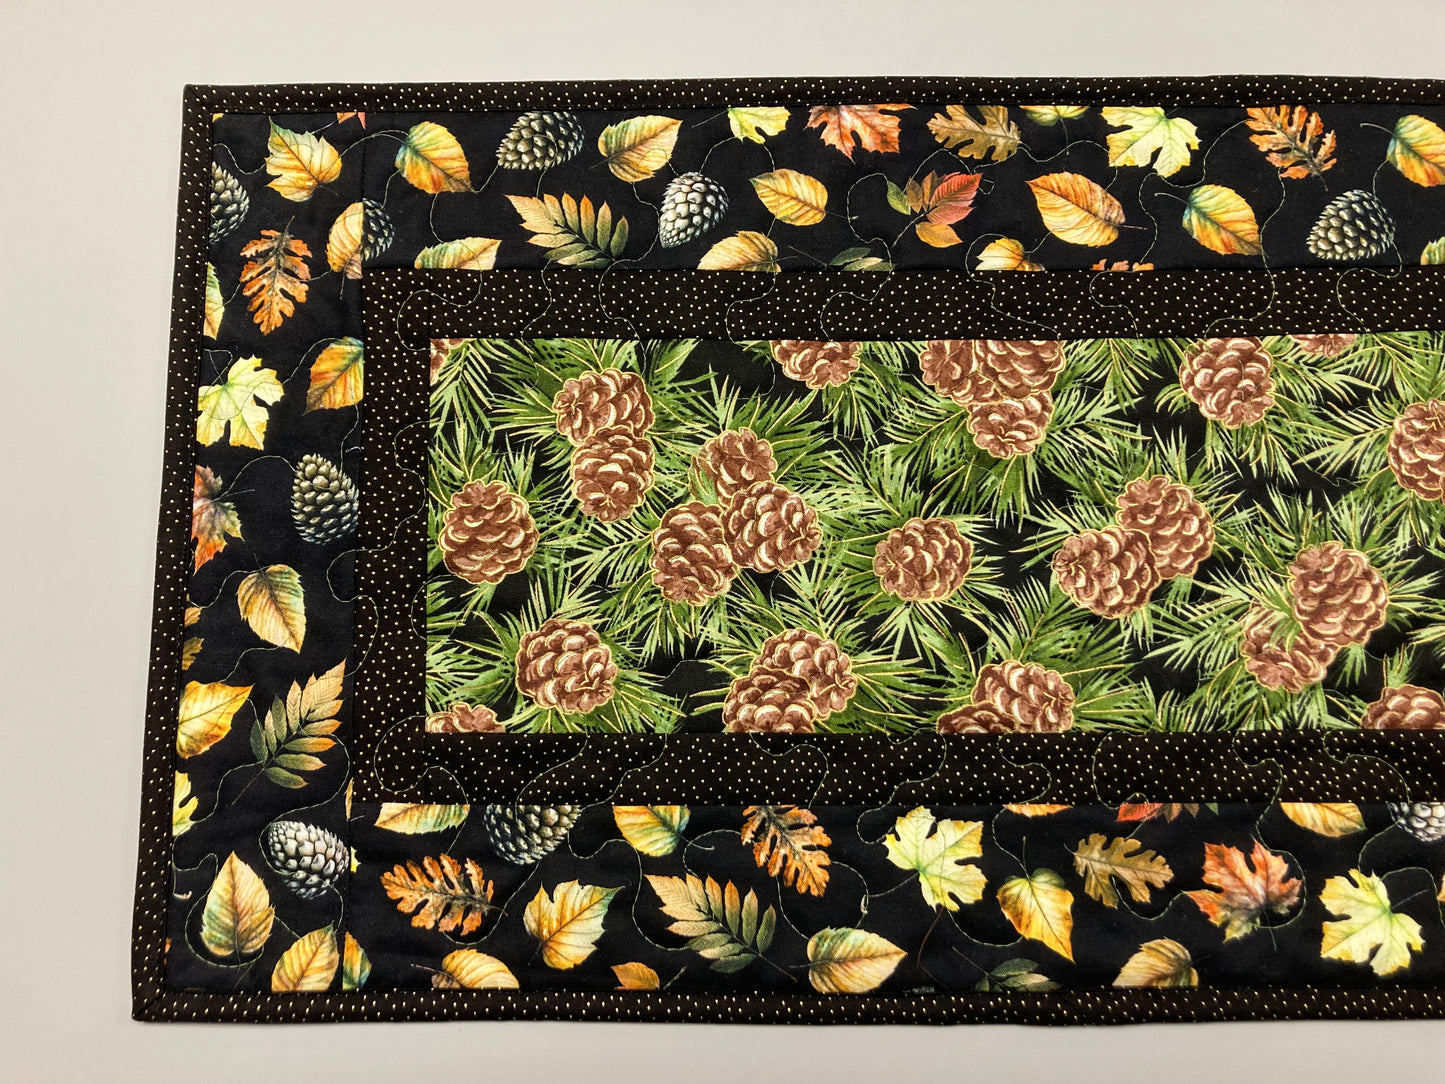 Pine Cones and Leaves Quilted Dining Table Runner, Reversible, Coffee Table Runner, Dresser Scarf Nightstand, End Table 13x48" Handmade